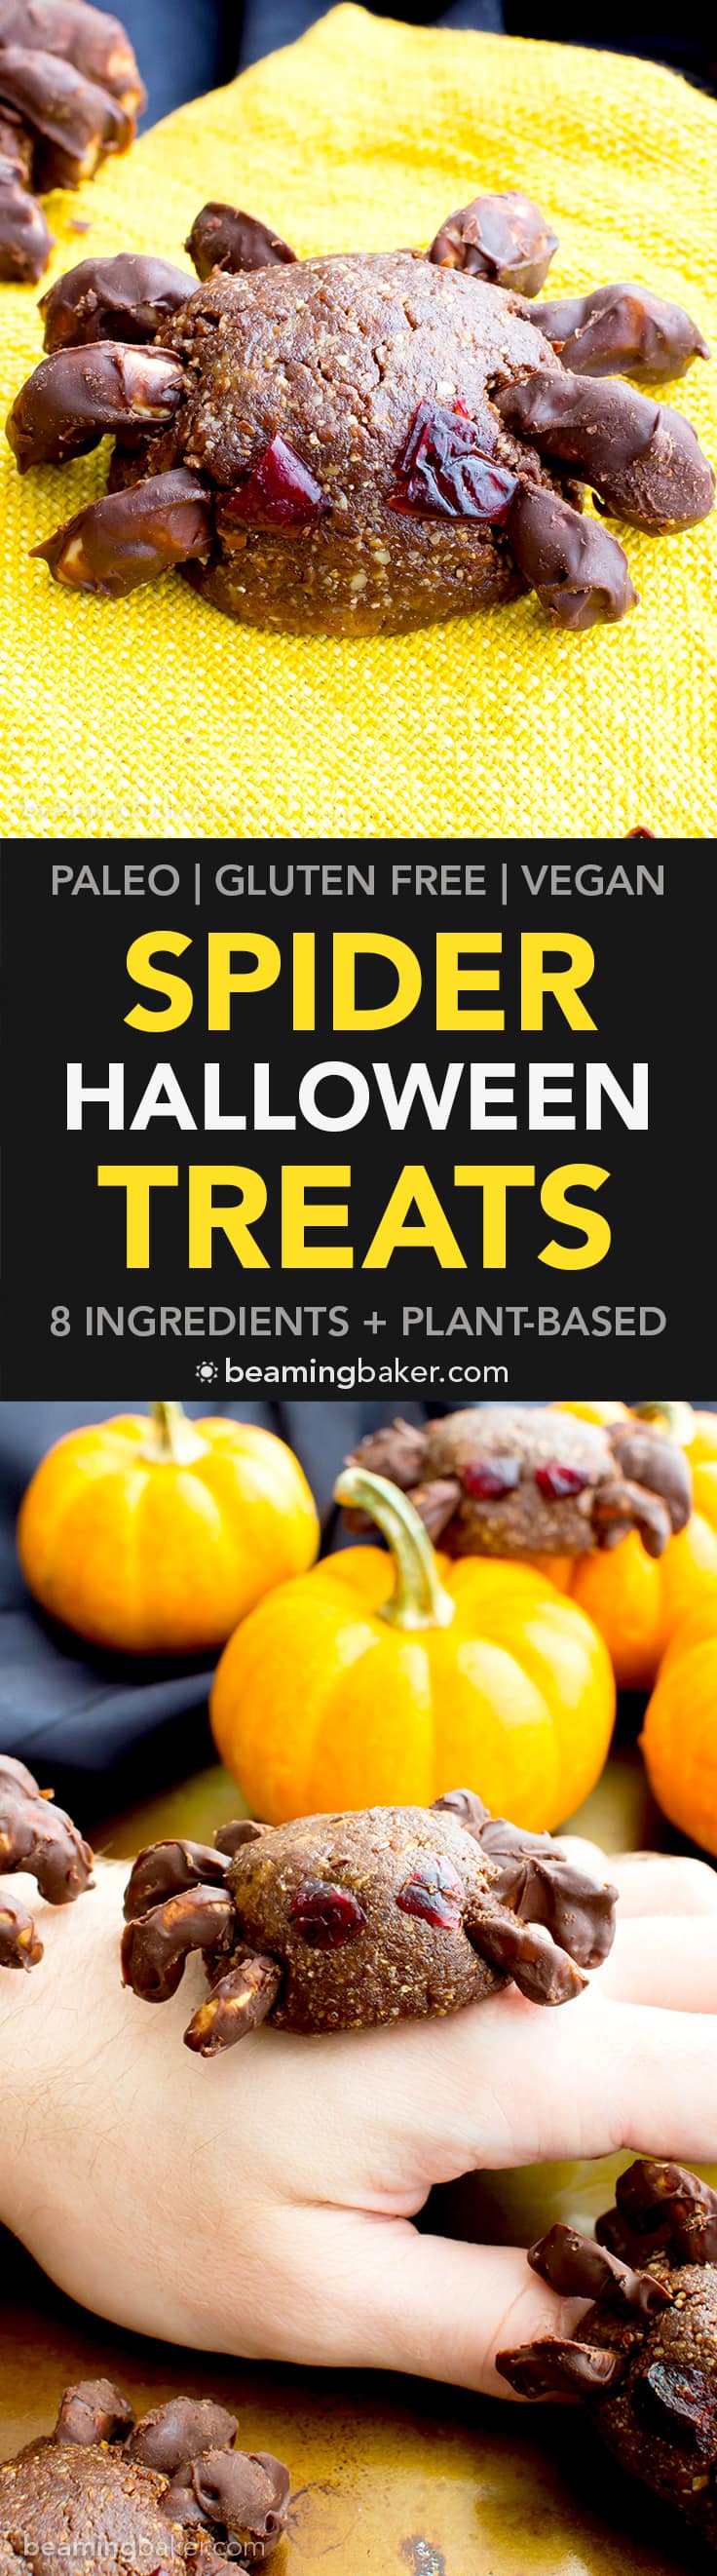 Vegan Halloween Spider Treats (V, GF, Paleo): an 8 ingredient recipe for super fun no bake spider treats packed with fruits and nuts for Halloween! #Vegan #Paleo #GlutenFree #DairyFree | BeamingBaker.com | @BeamingBaker